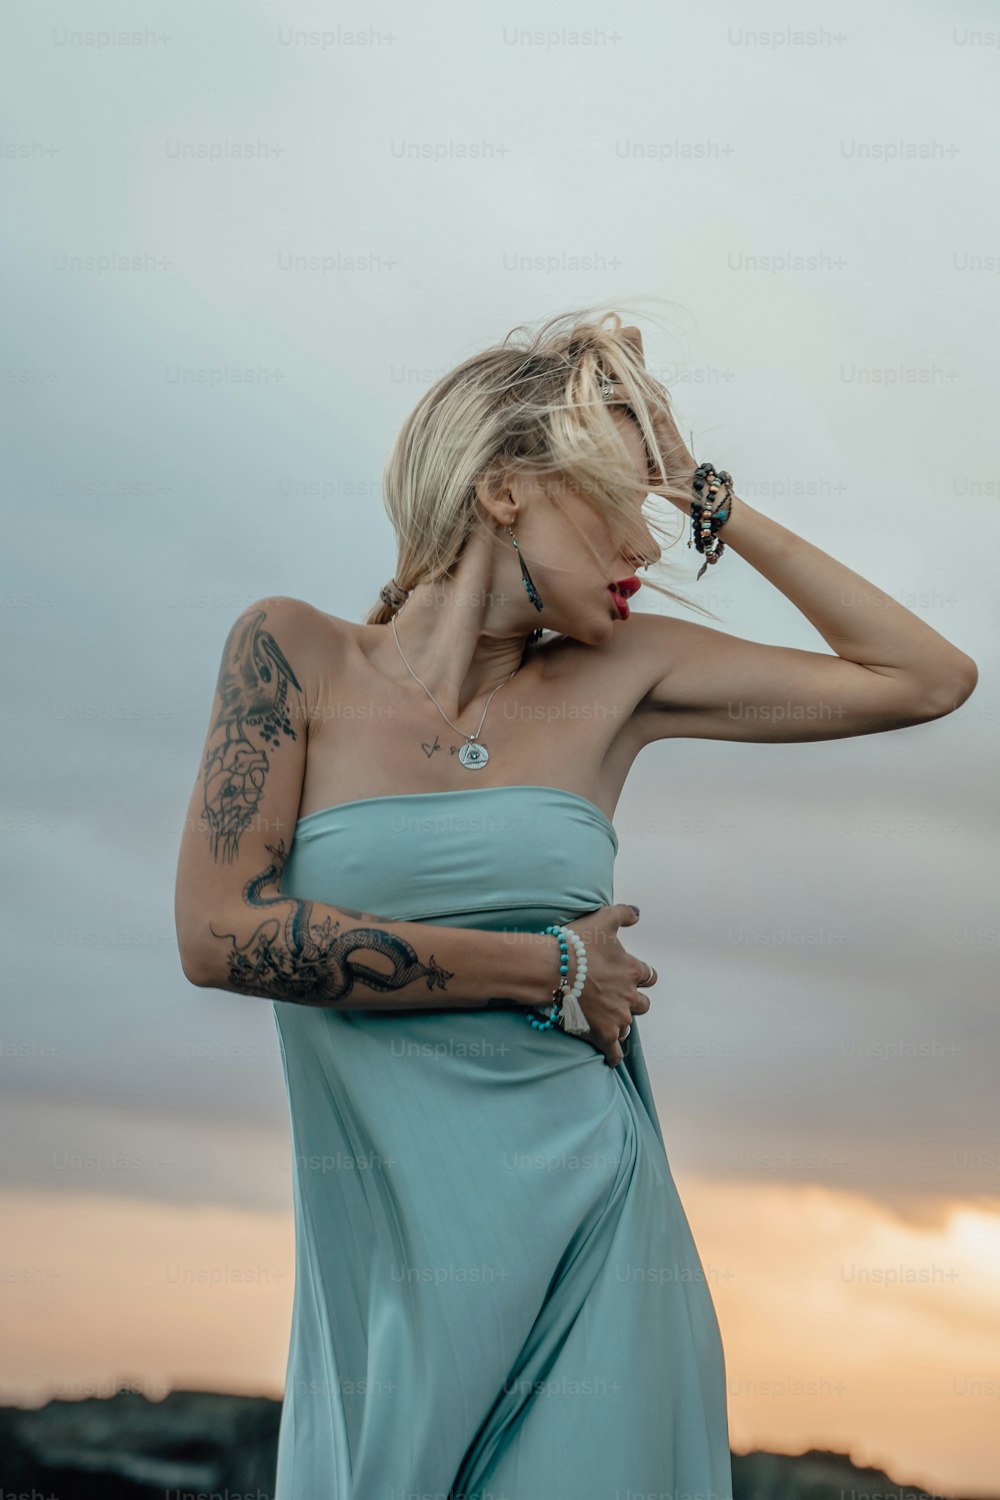 a woman in a blue dress with a tattoo on her arm